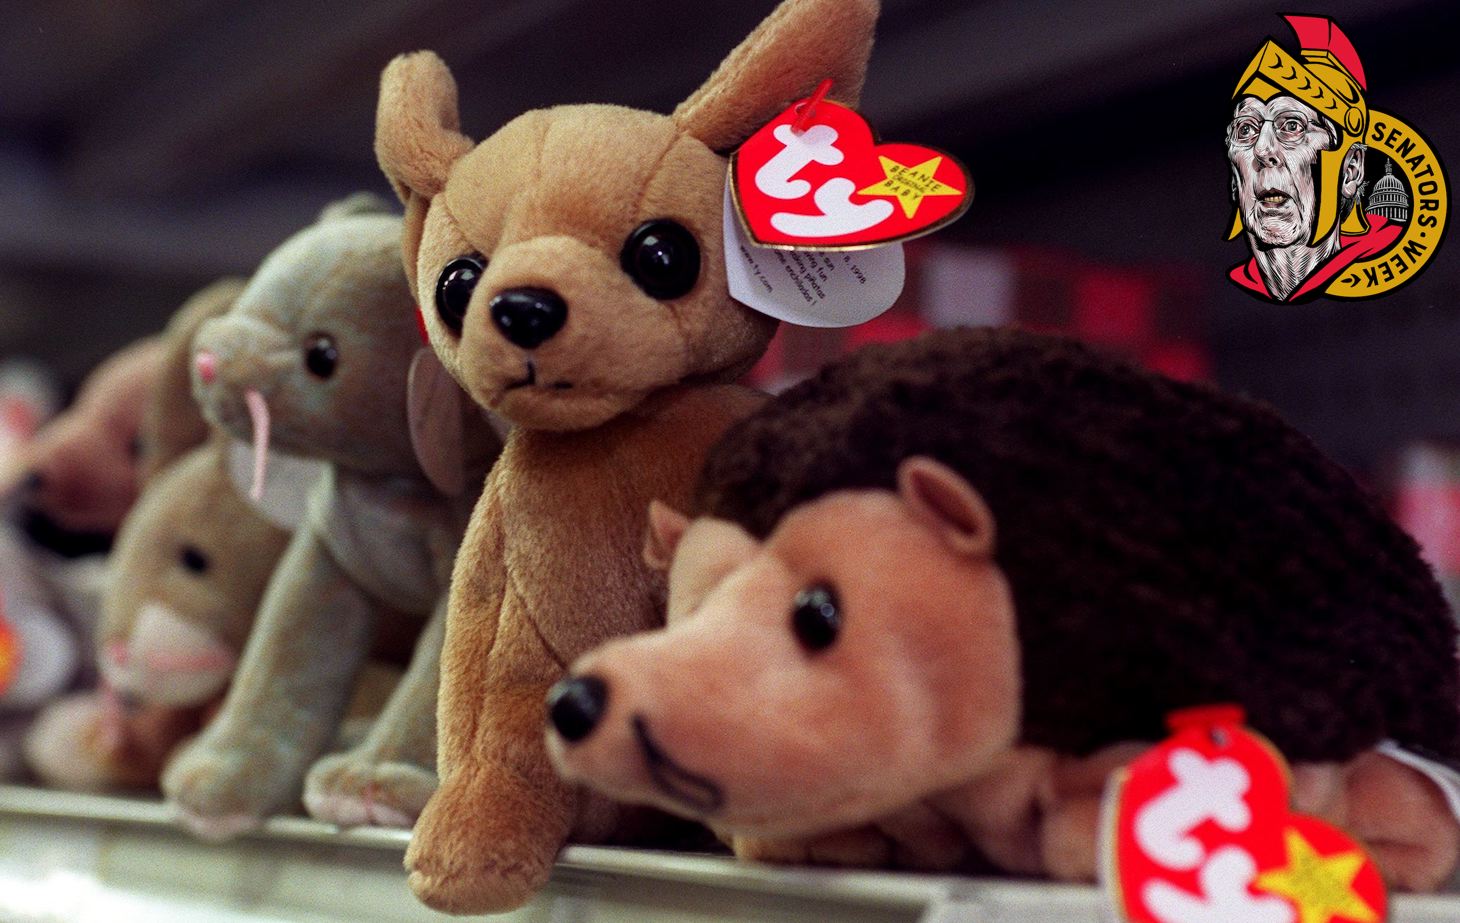 WASHINGTON, : Beanie Babies sit on the shelf of a variety store waiting for a new owner 01 September 1999 in Washington DC. The maker of Beanie Babies, Ty Inc., announced "All Beanies will be retired" as of 31 December 1999. AFP PHOTO Joyce NALTCHAYAN (Photo credit should read JOYCE NALTCHAYAN/AFP via Getty Images)